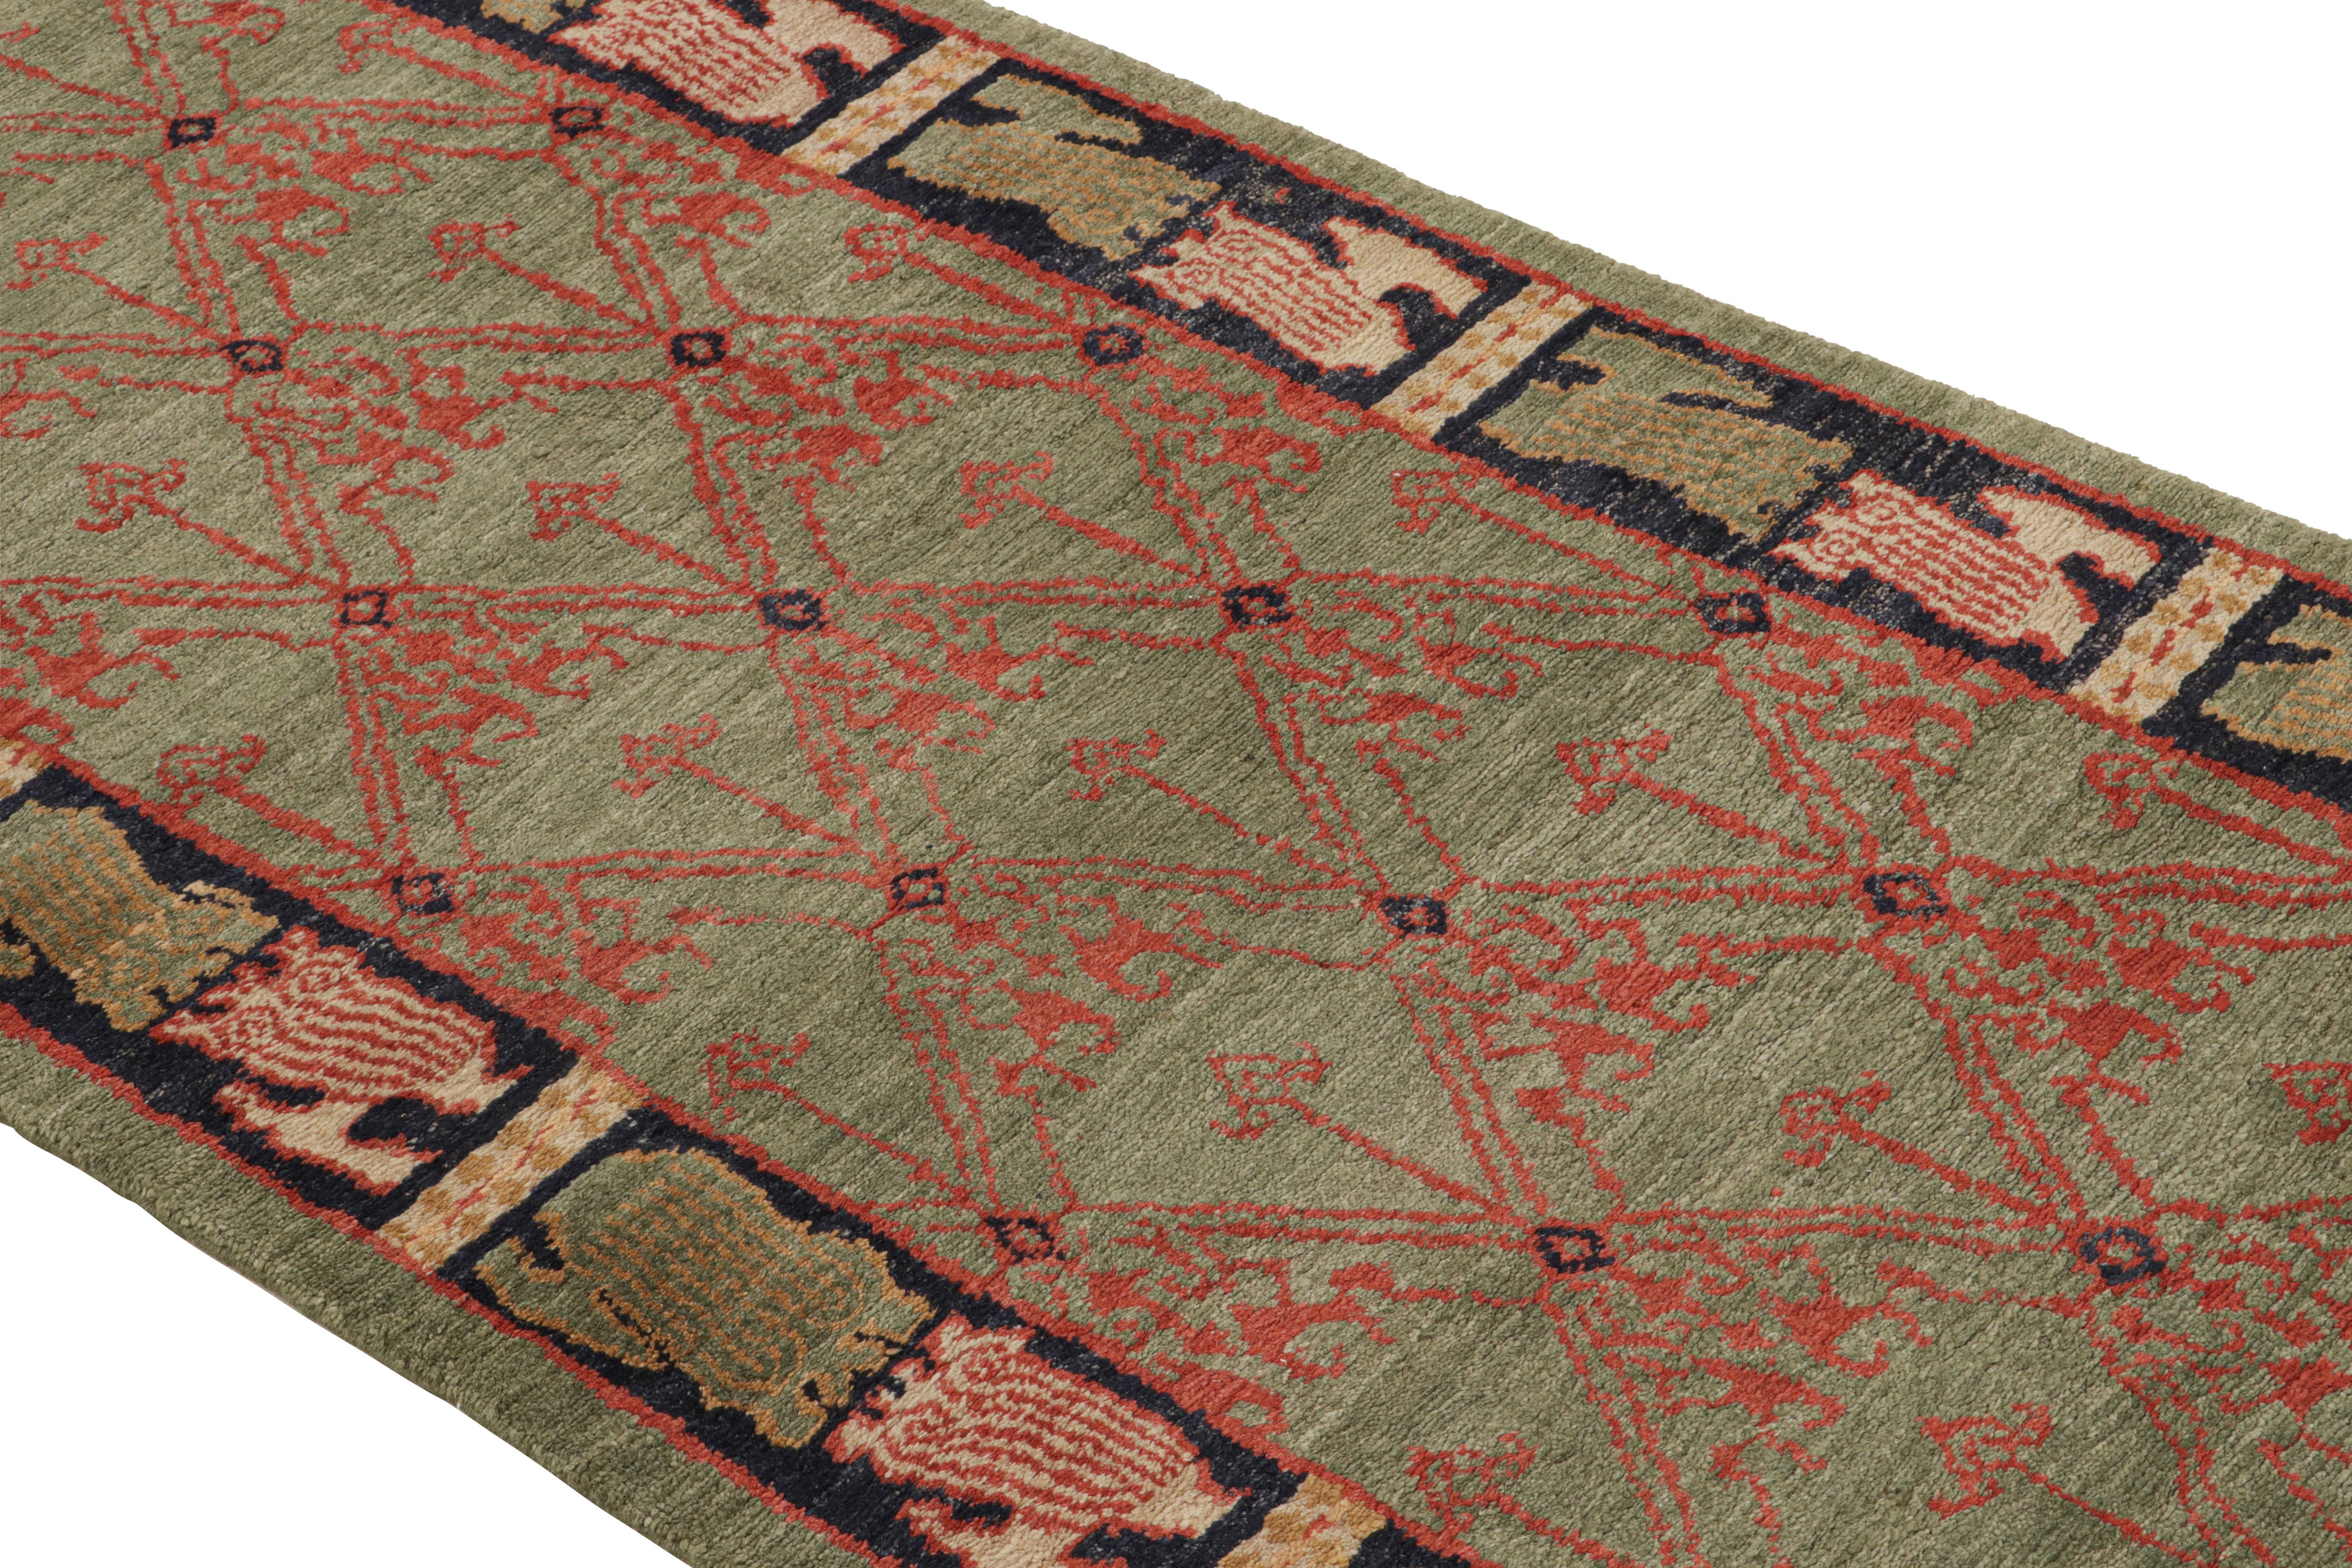 Hand-knotted in Nepal with high-quality wool, this traditional Cortex runner hosts a visually inviting array of abrash green and tangerine red colorways, complemented by a finely woven geometric field pattern and a series of ornate curvilinear black